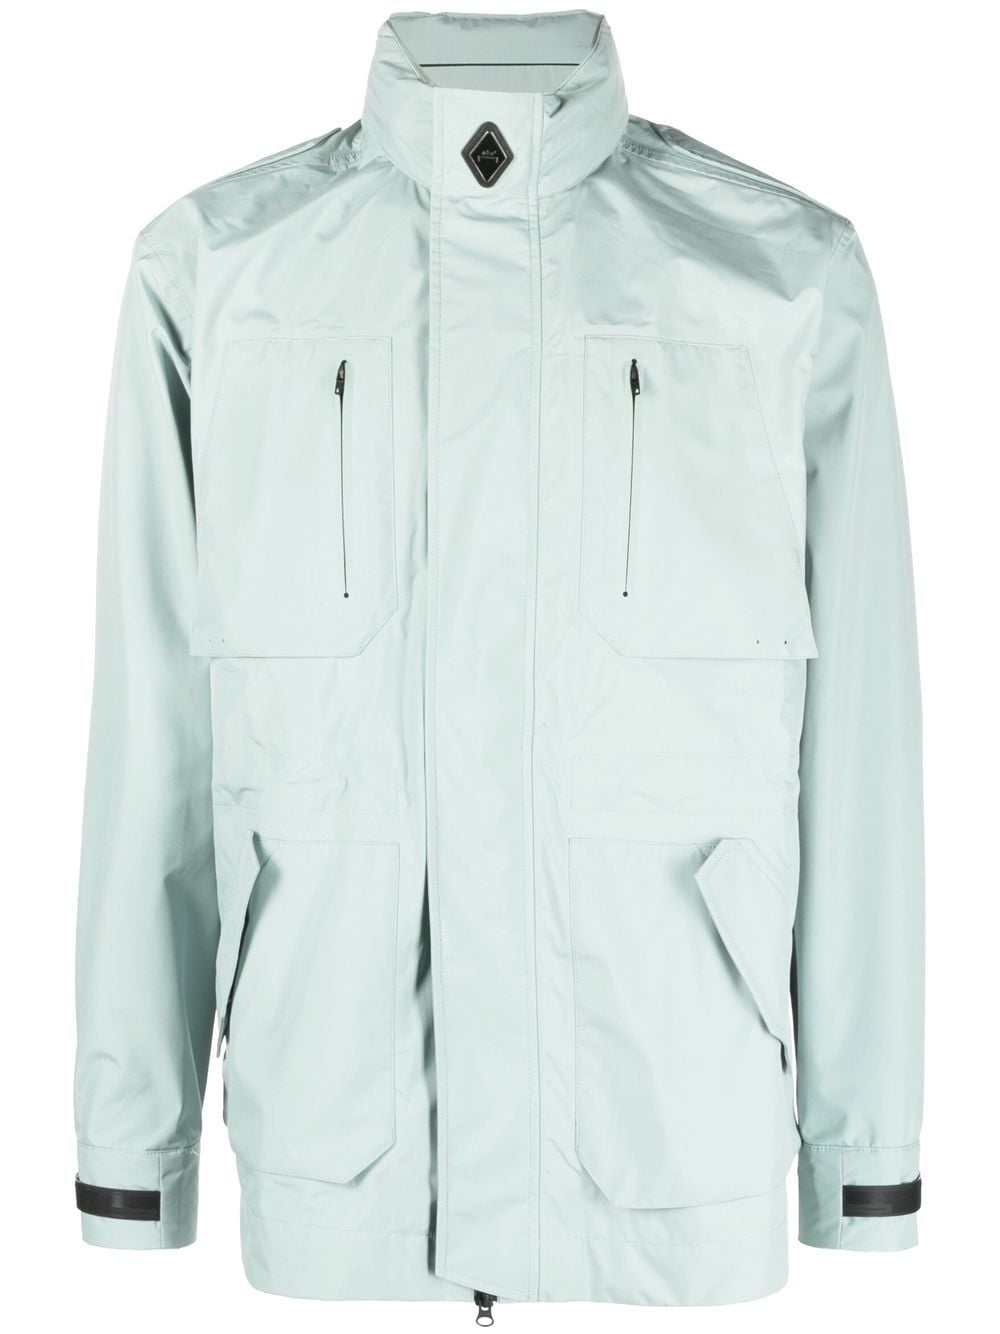 A-COLD-WALL* M-65 Model VI jacket - Green von A-COLD-WALL*